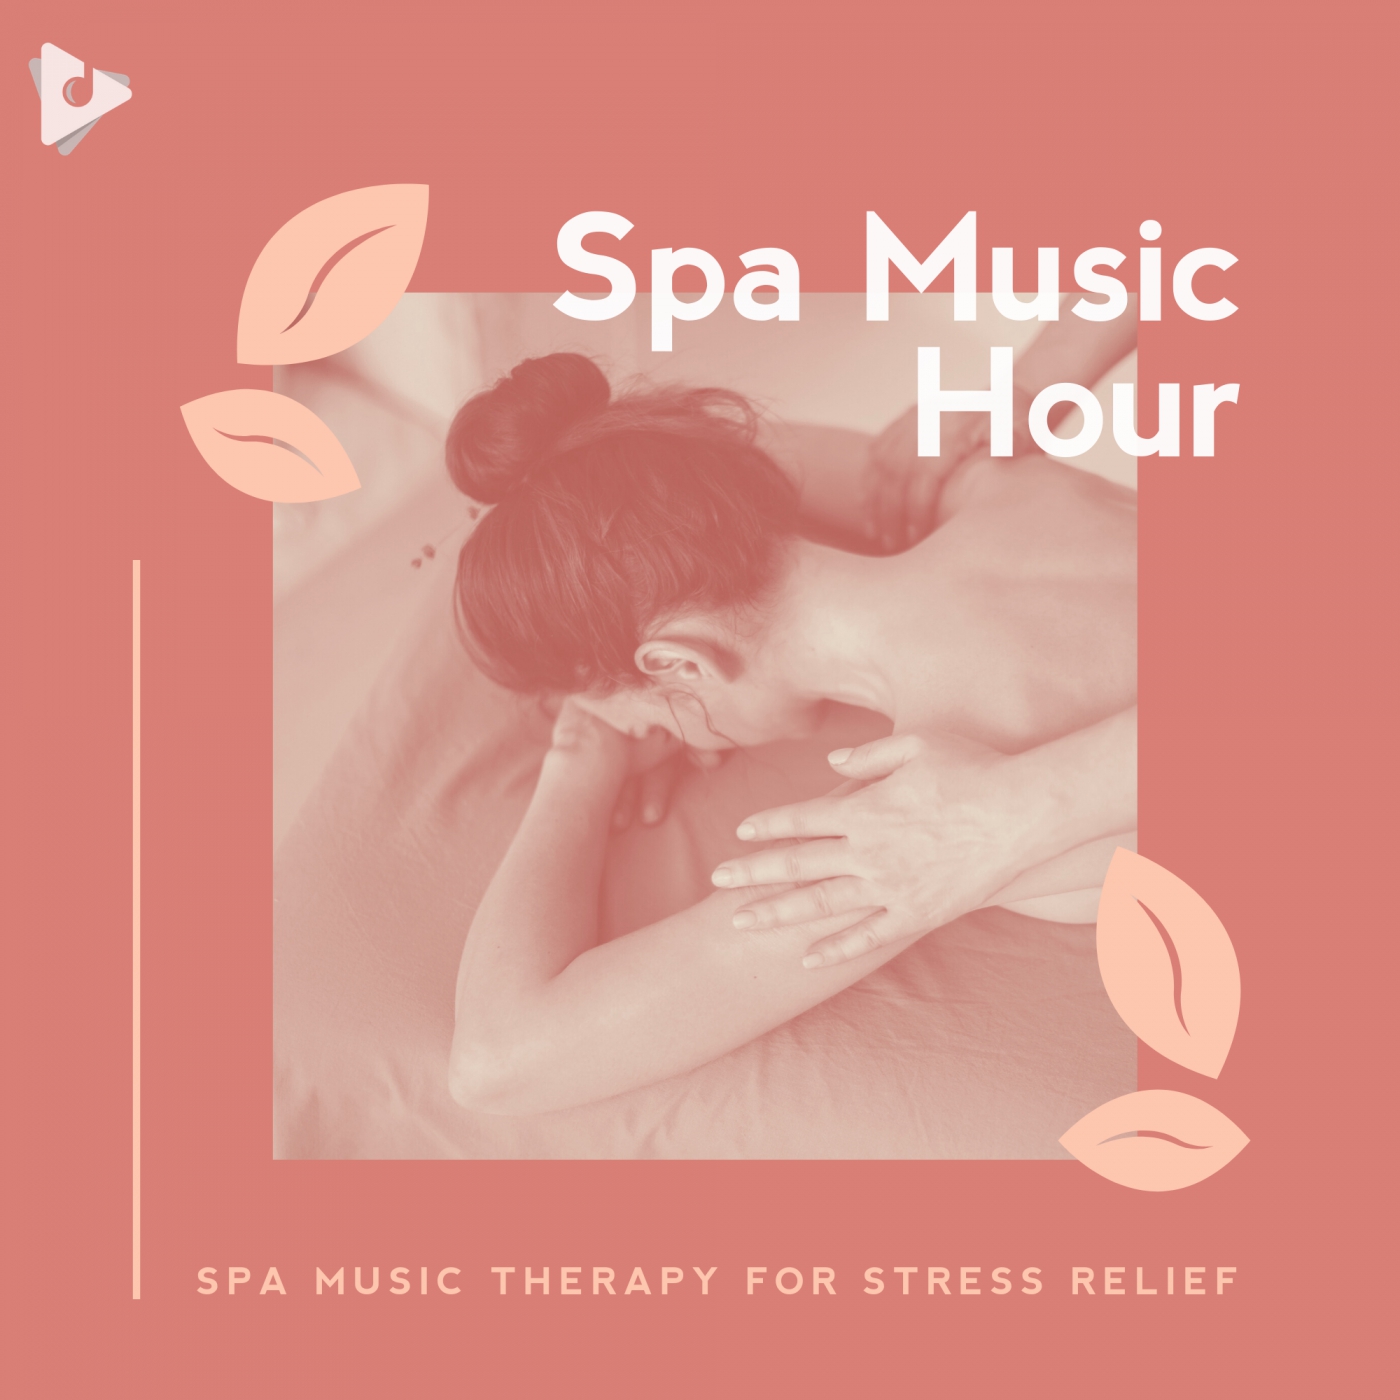 Spa Music Therapy for Stress Relief